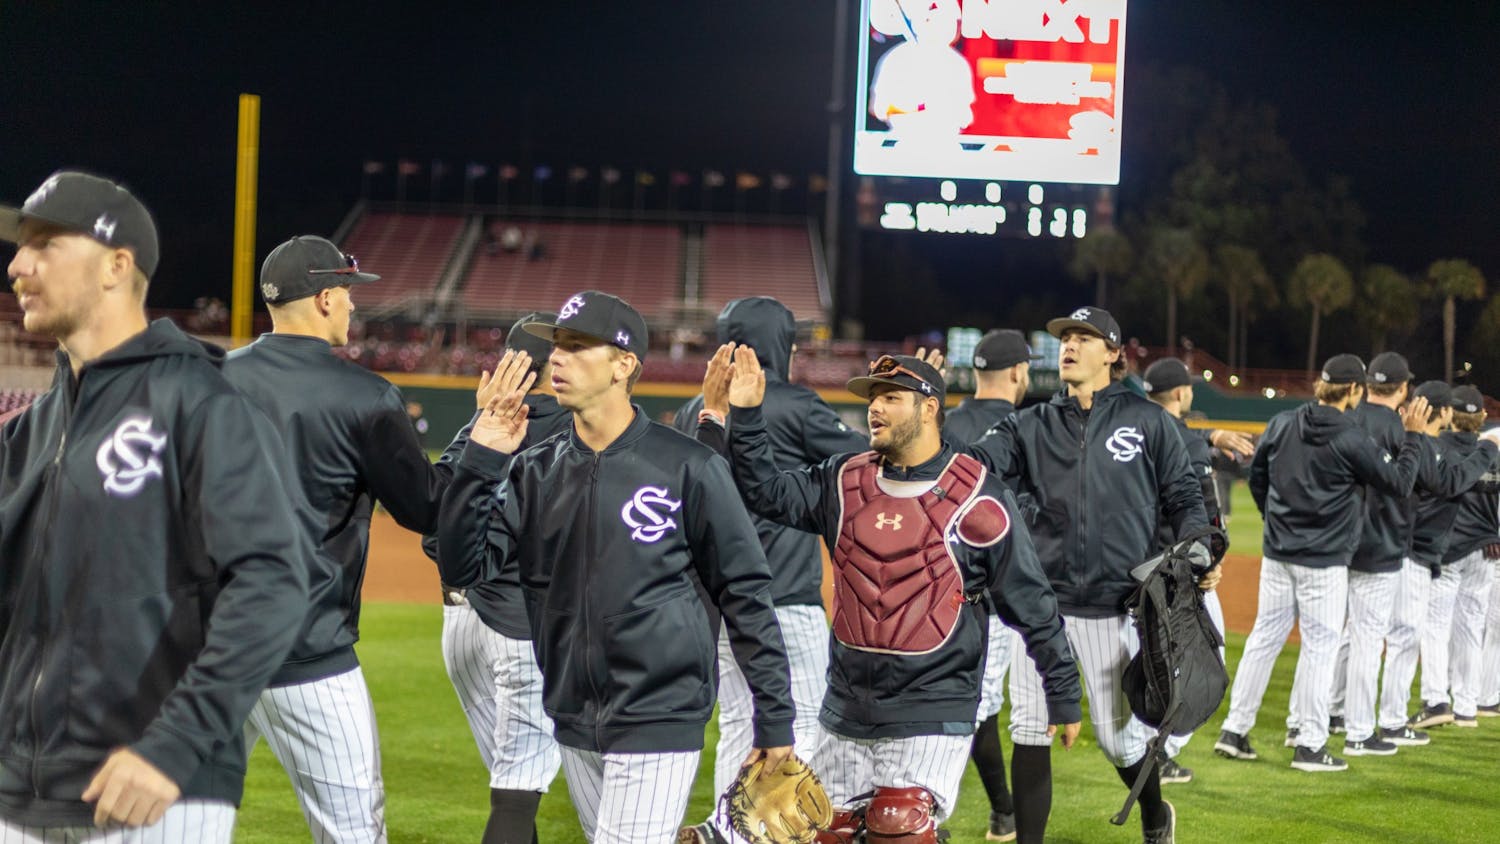 The South Carolina baseball team give high fives at the end of a game against Vanderbilt on Friday, March 25, 2022 in Columbia, SC.